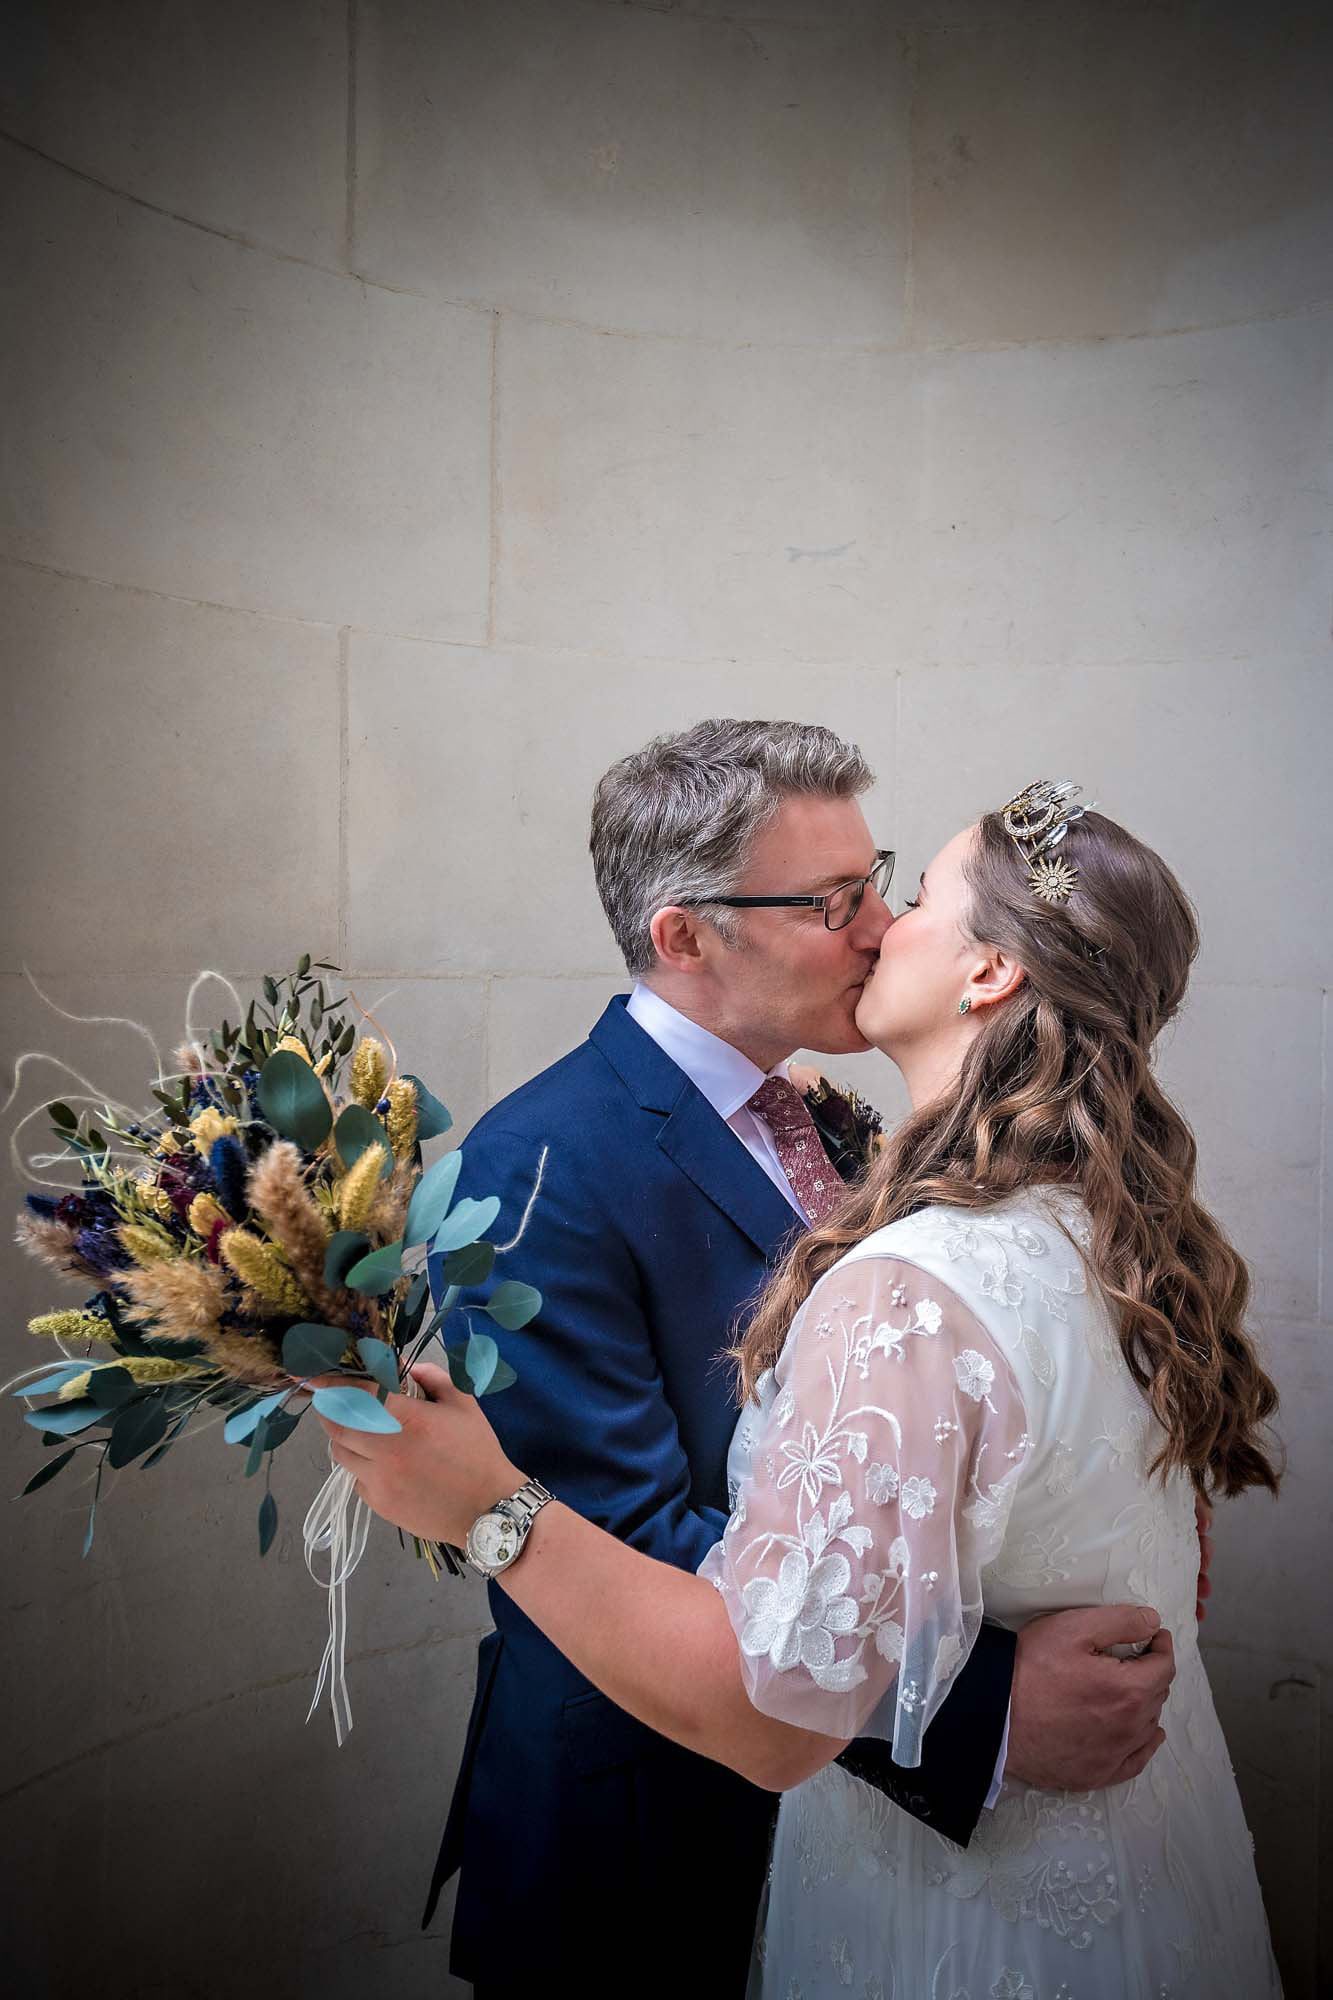 The newlyweds kiss after wedding in London